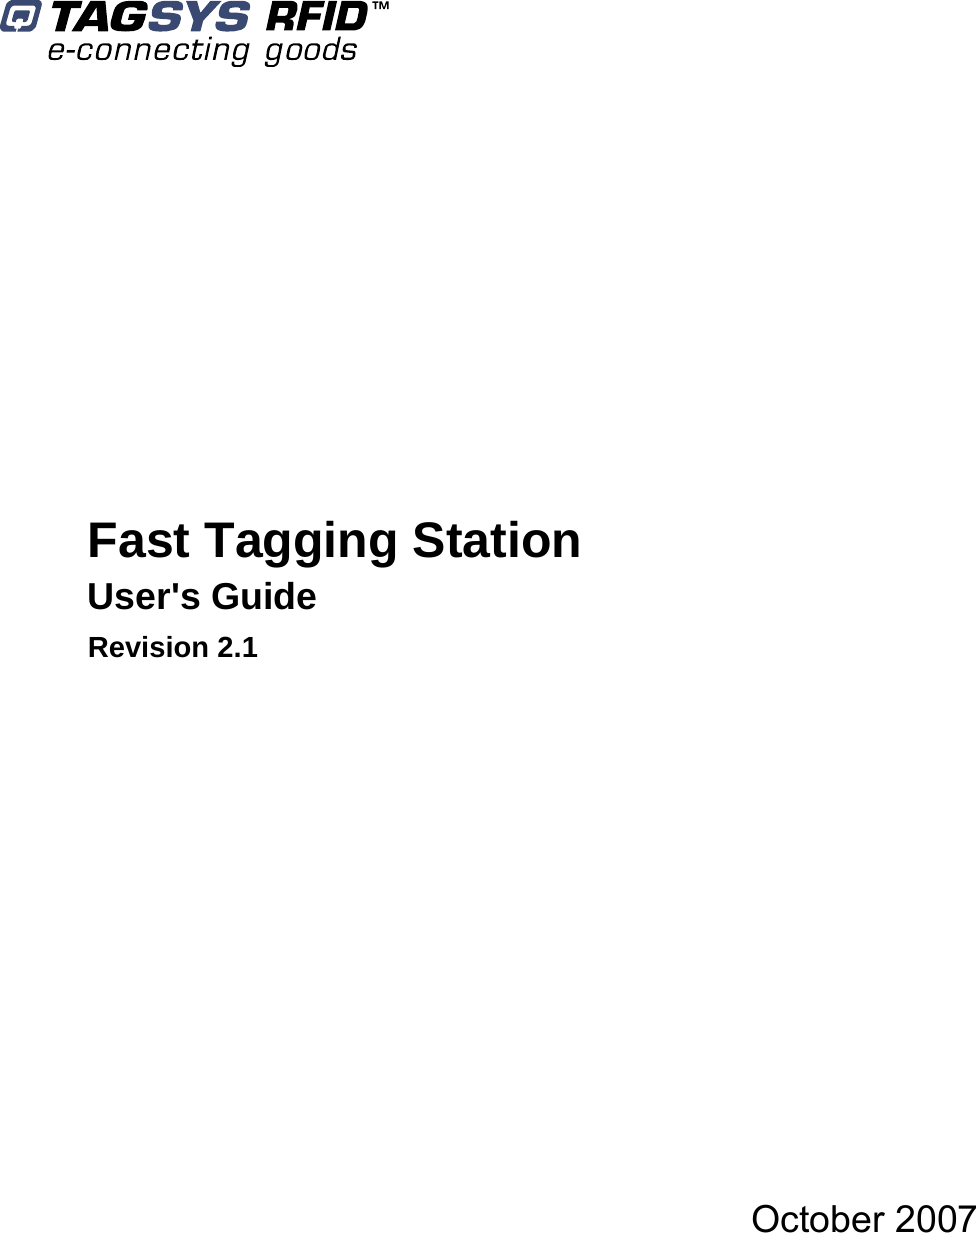             Fast Tagging Station User&apos;s Guide Revision 2.1                     October 2007   